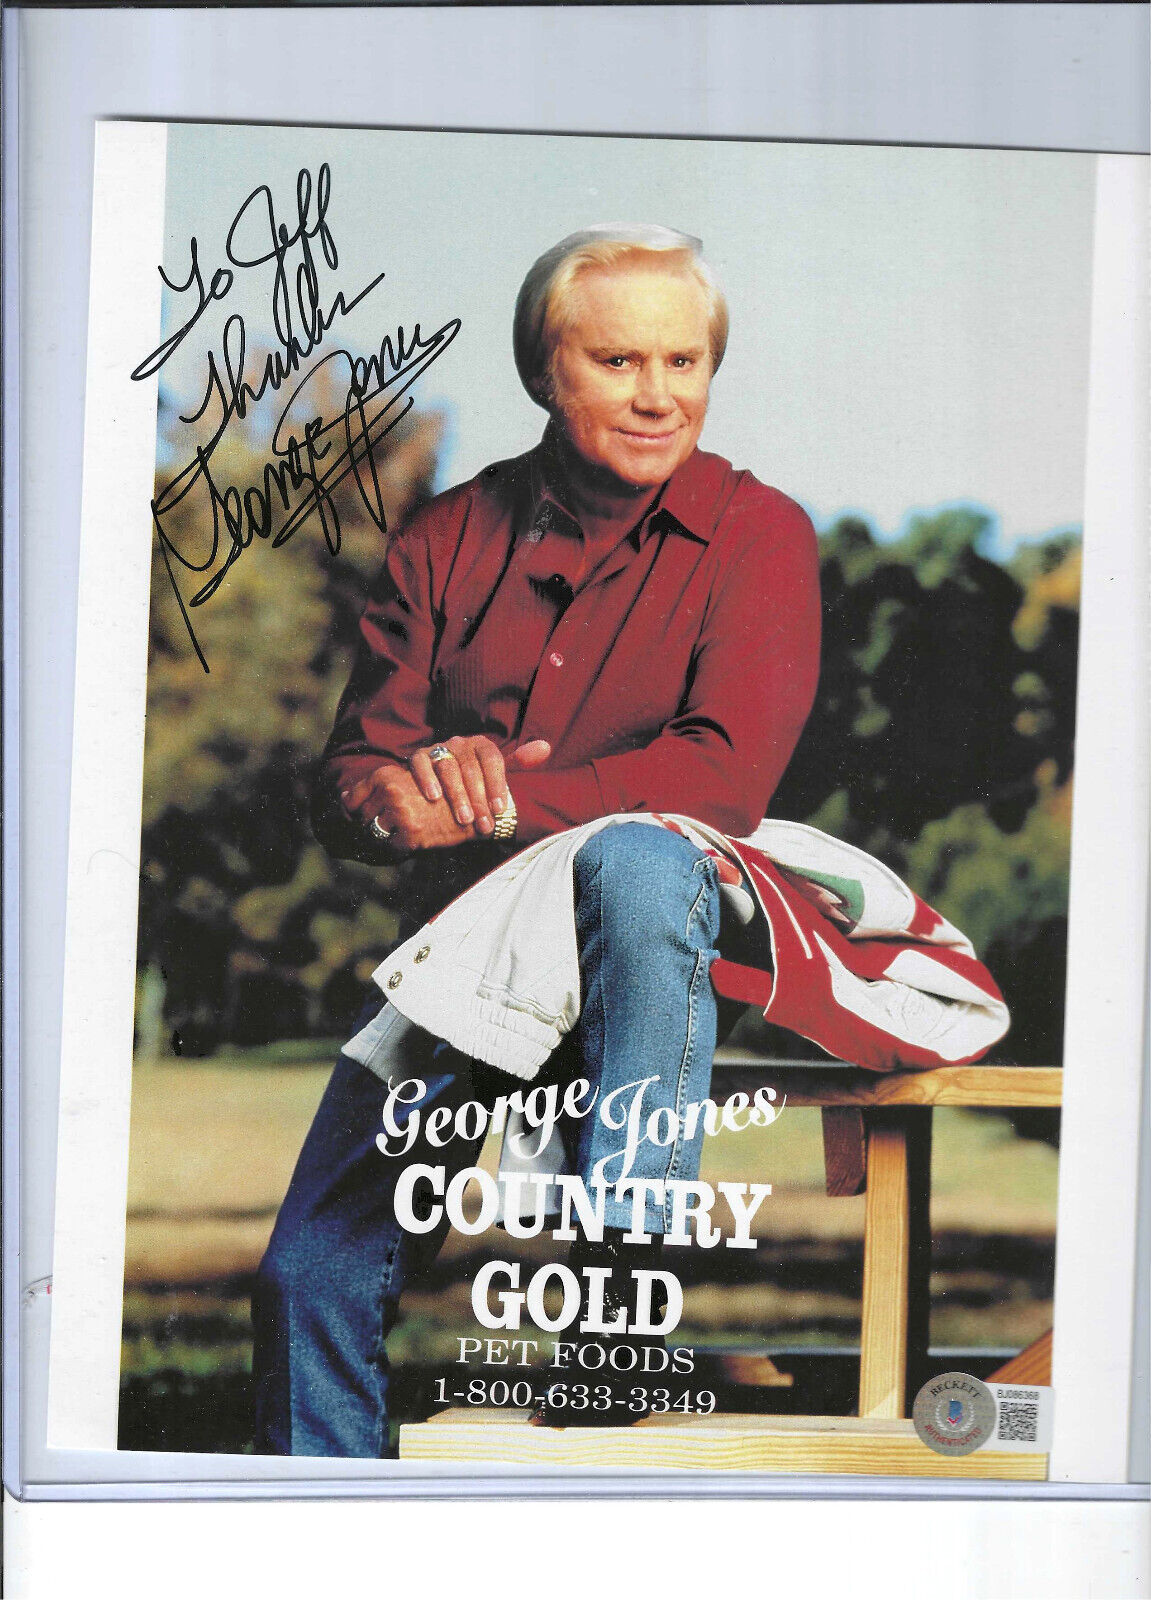 George Jones Country Gold Pet Foods Photo Signed Beckett Authentication BAS